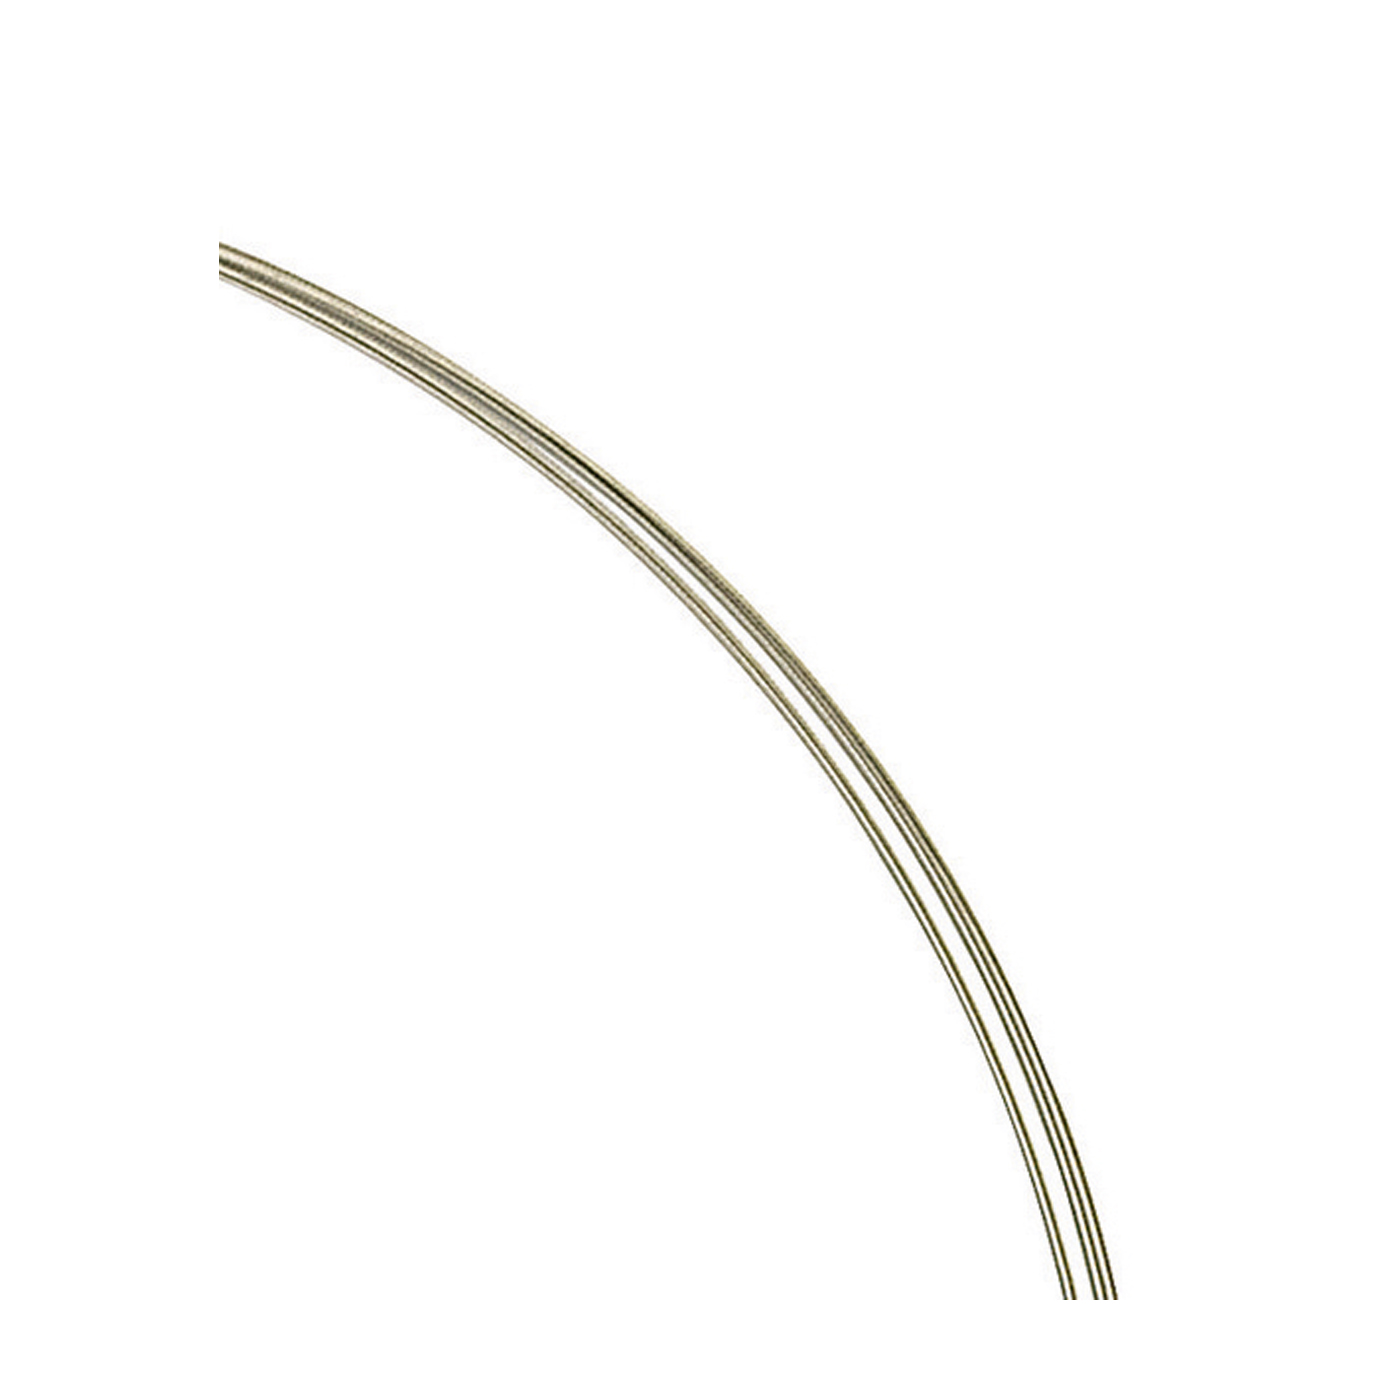 Steel Cable Neck Wire, 5-Strand, ø 0.5 mm, 45 cm - 1 piece